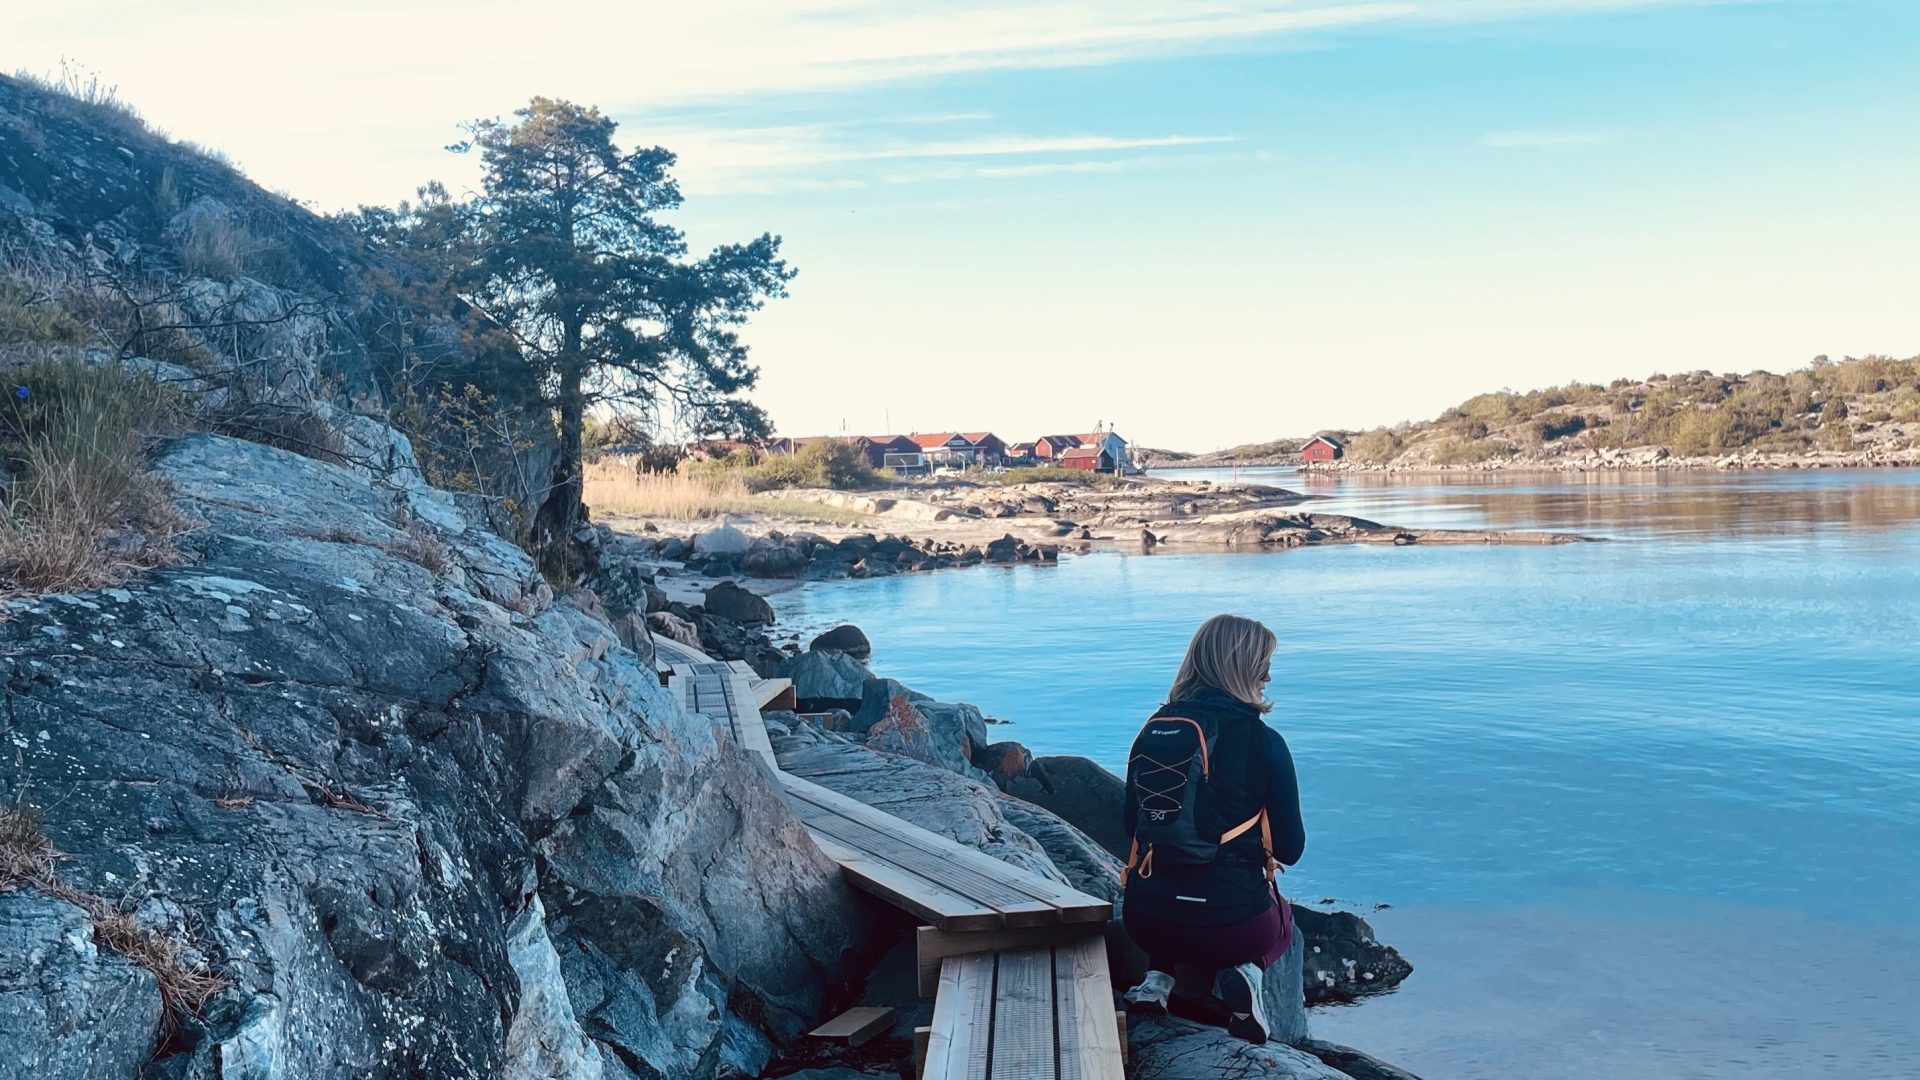 Caravanning in Sweden and staying active